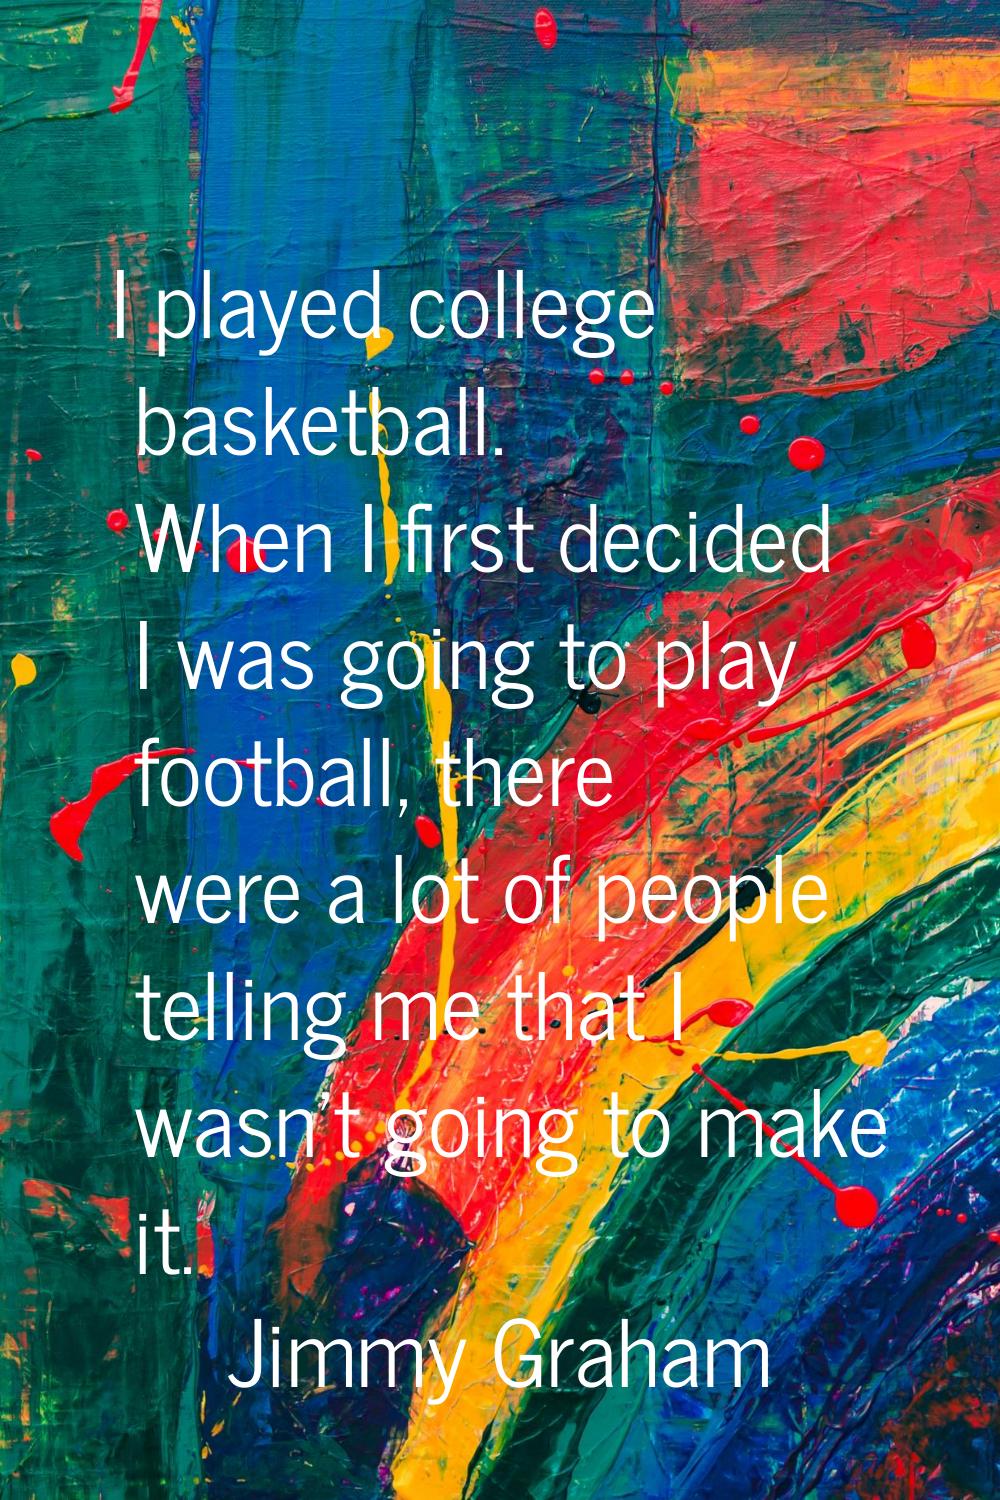 I played college basketball. When I first decided I was going to play football, there were a lot of